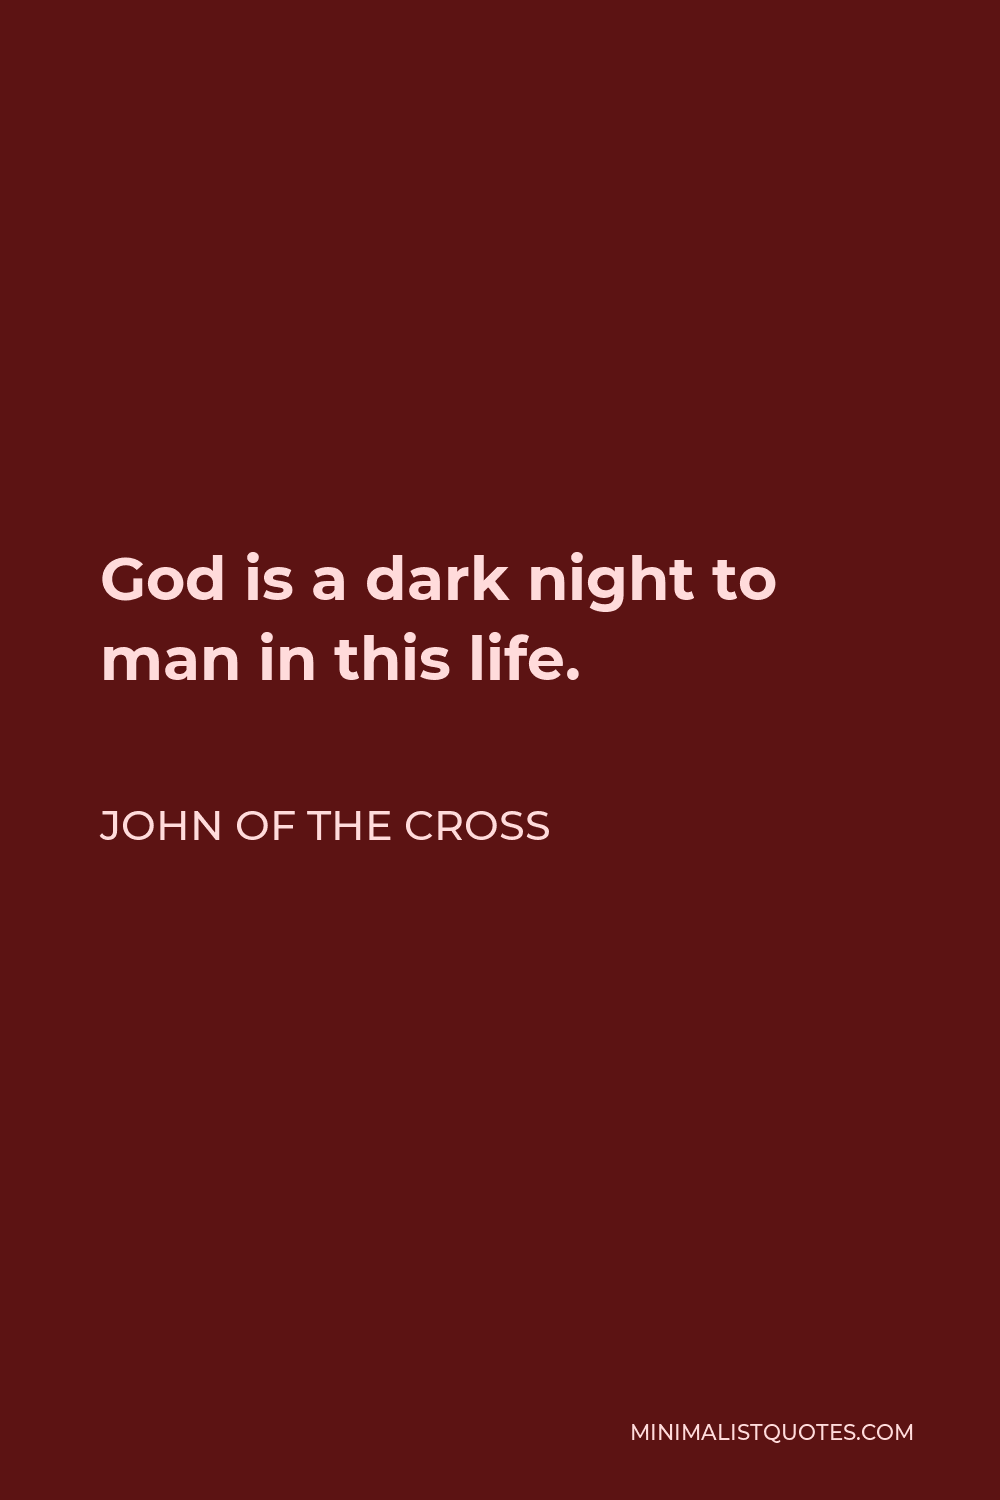 John of the Cross Quote - God is a dark night to man in this life.